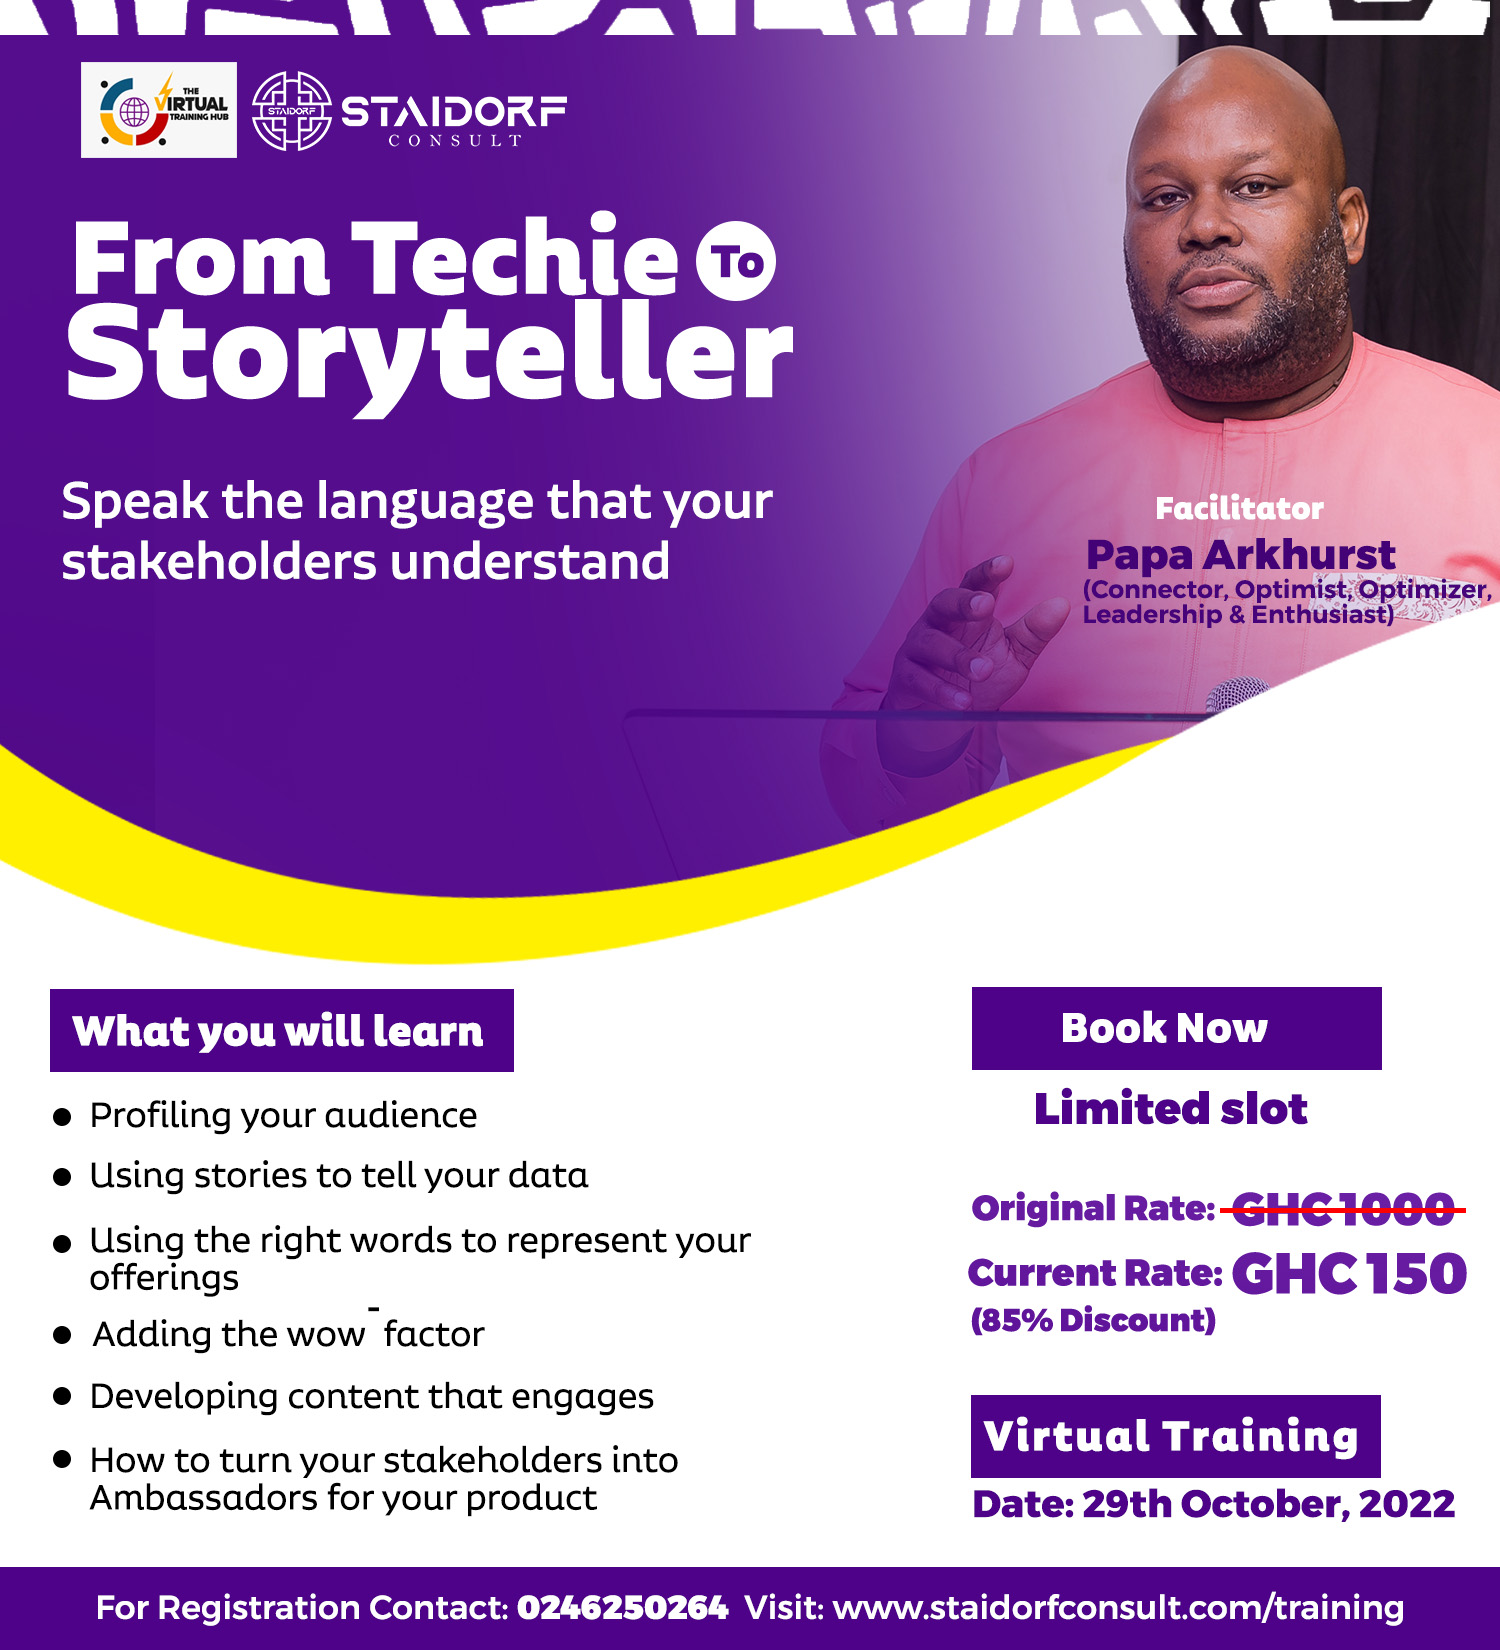 FROM TECHIE TO STORYTELLER 2